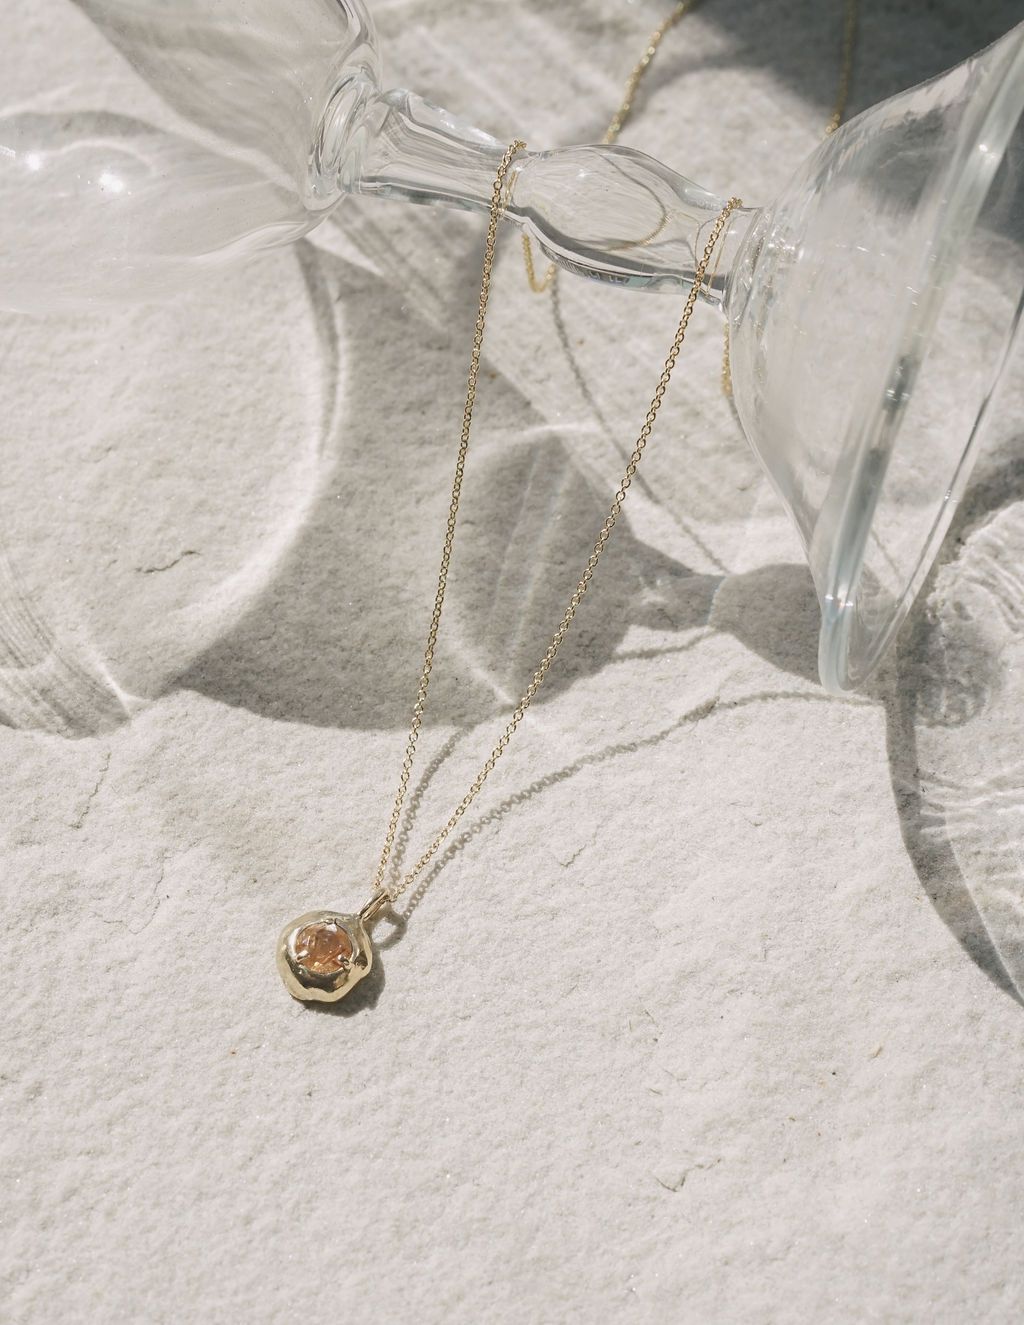 The Keeper Necklace is a quartz pendant necklace handmade in northern California by Amanda Hunt. Keep the energy of quartz close to your heart.